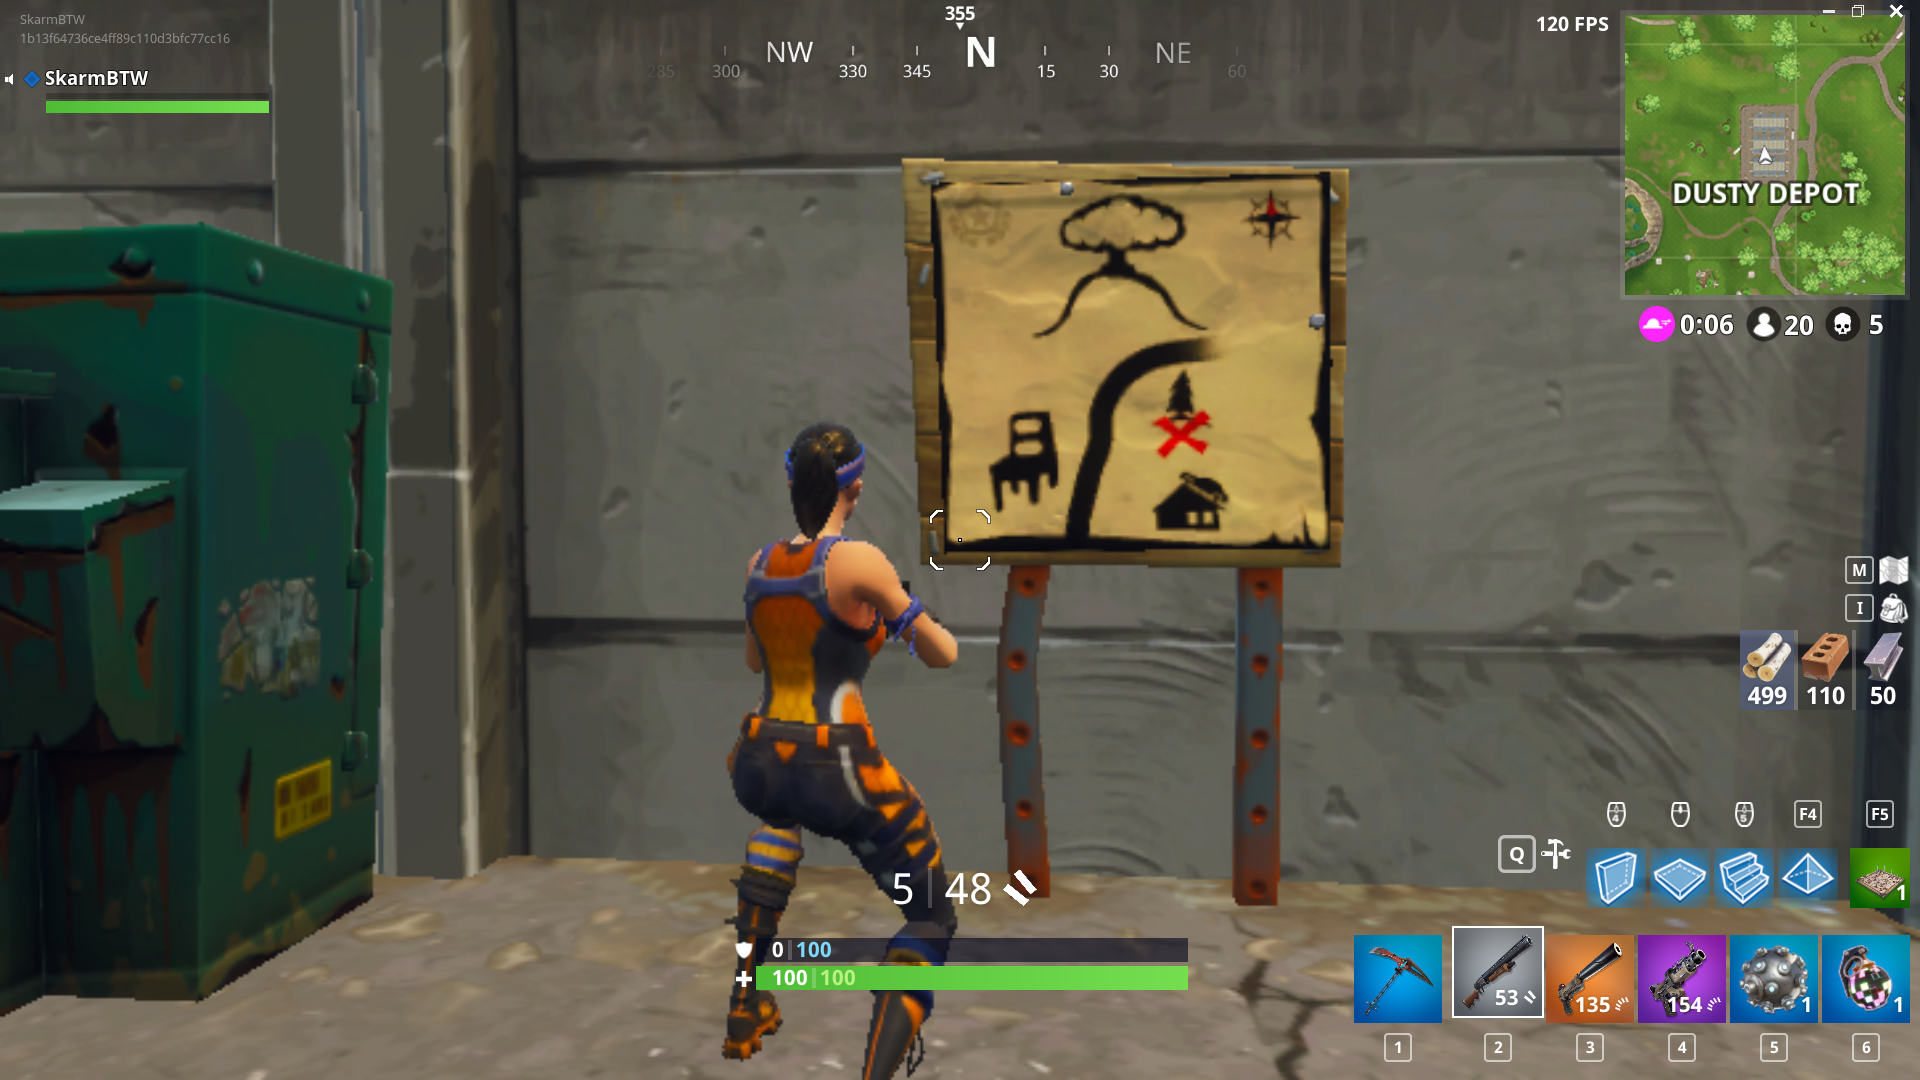 Follow The Treasure Trail At Dusty Depot Any Ideas Where This